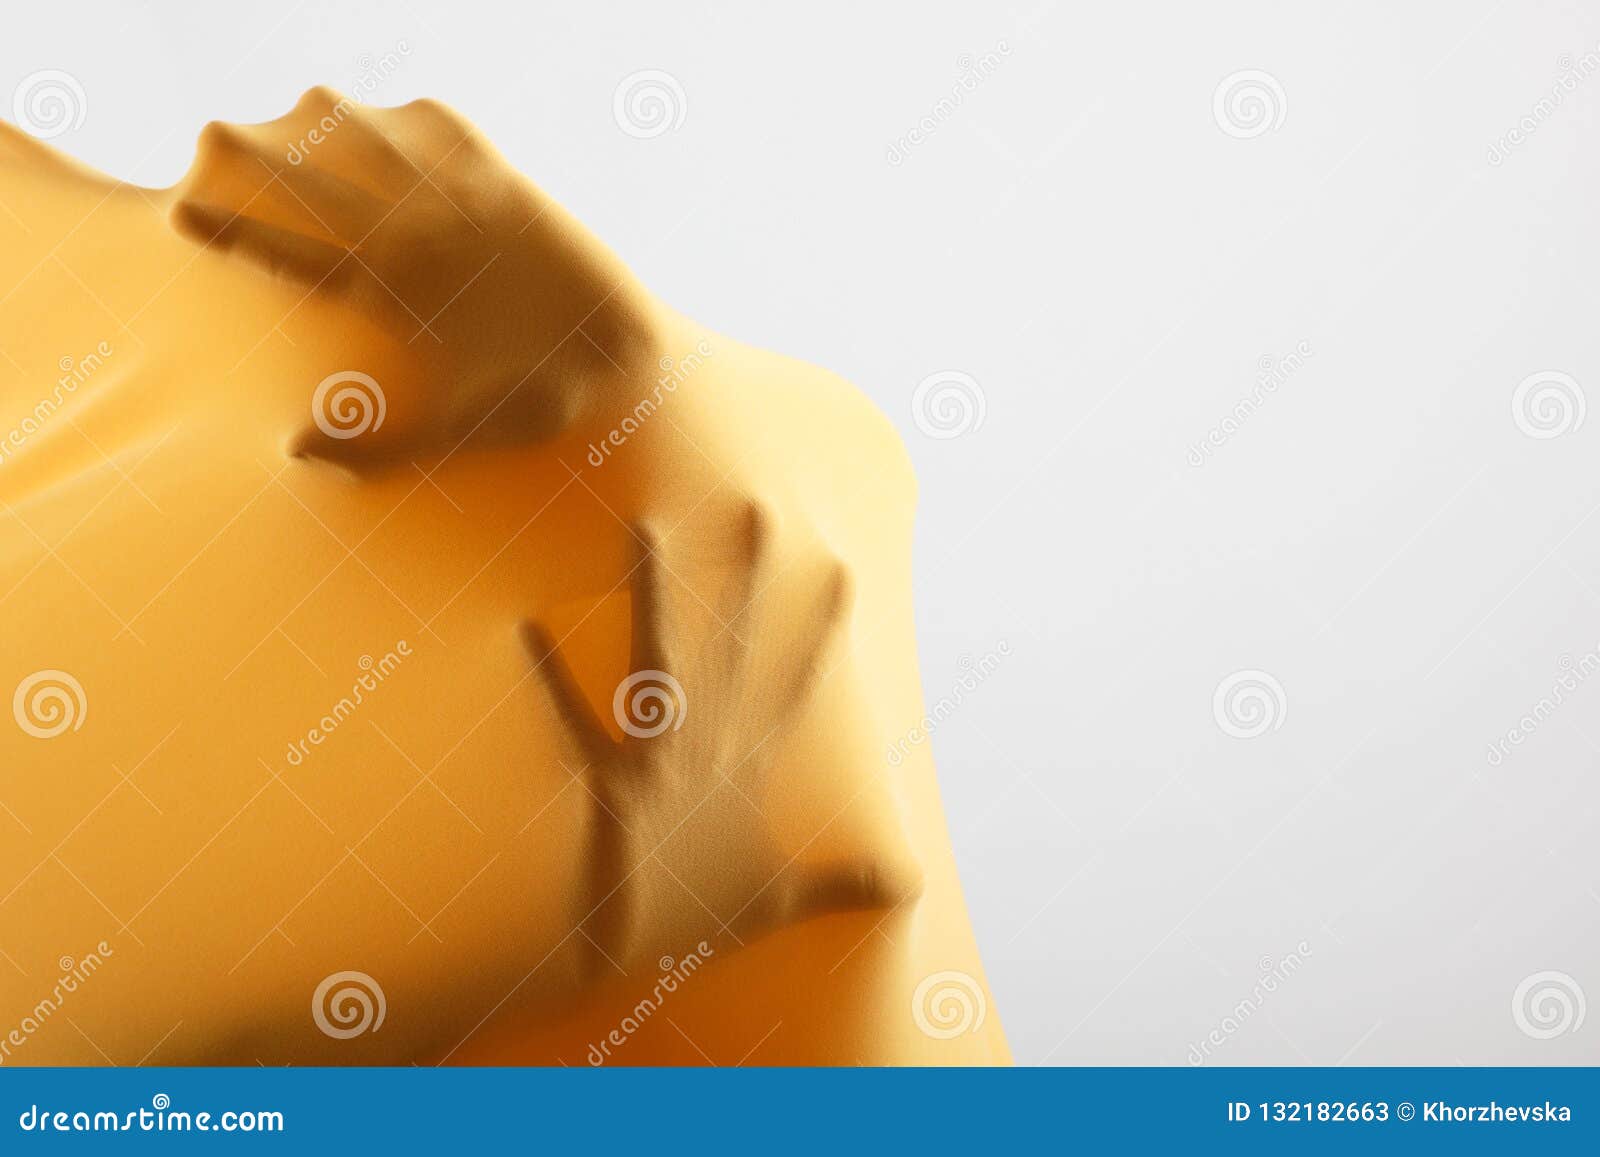 abstract hands, human arm inside yellow fabric